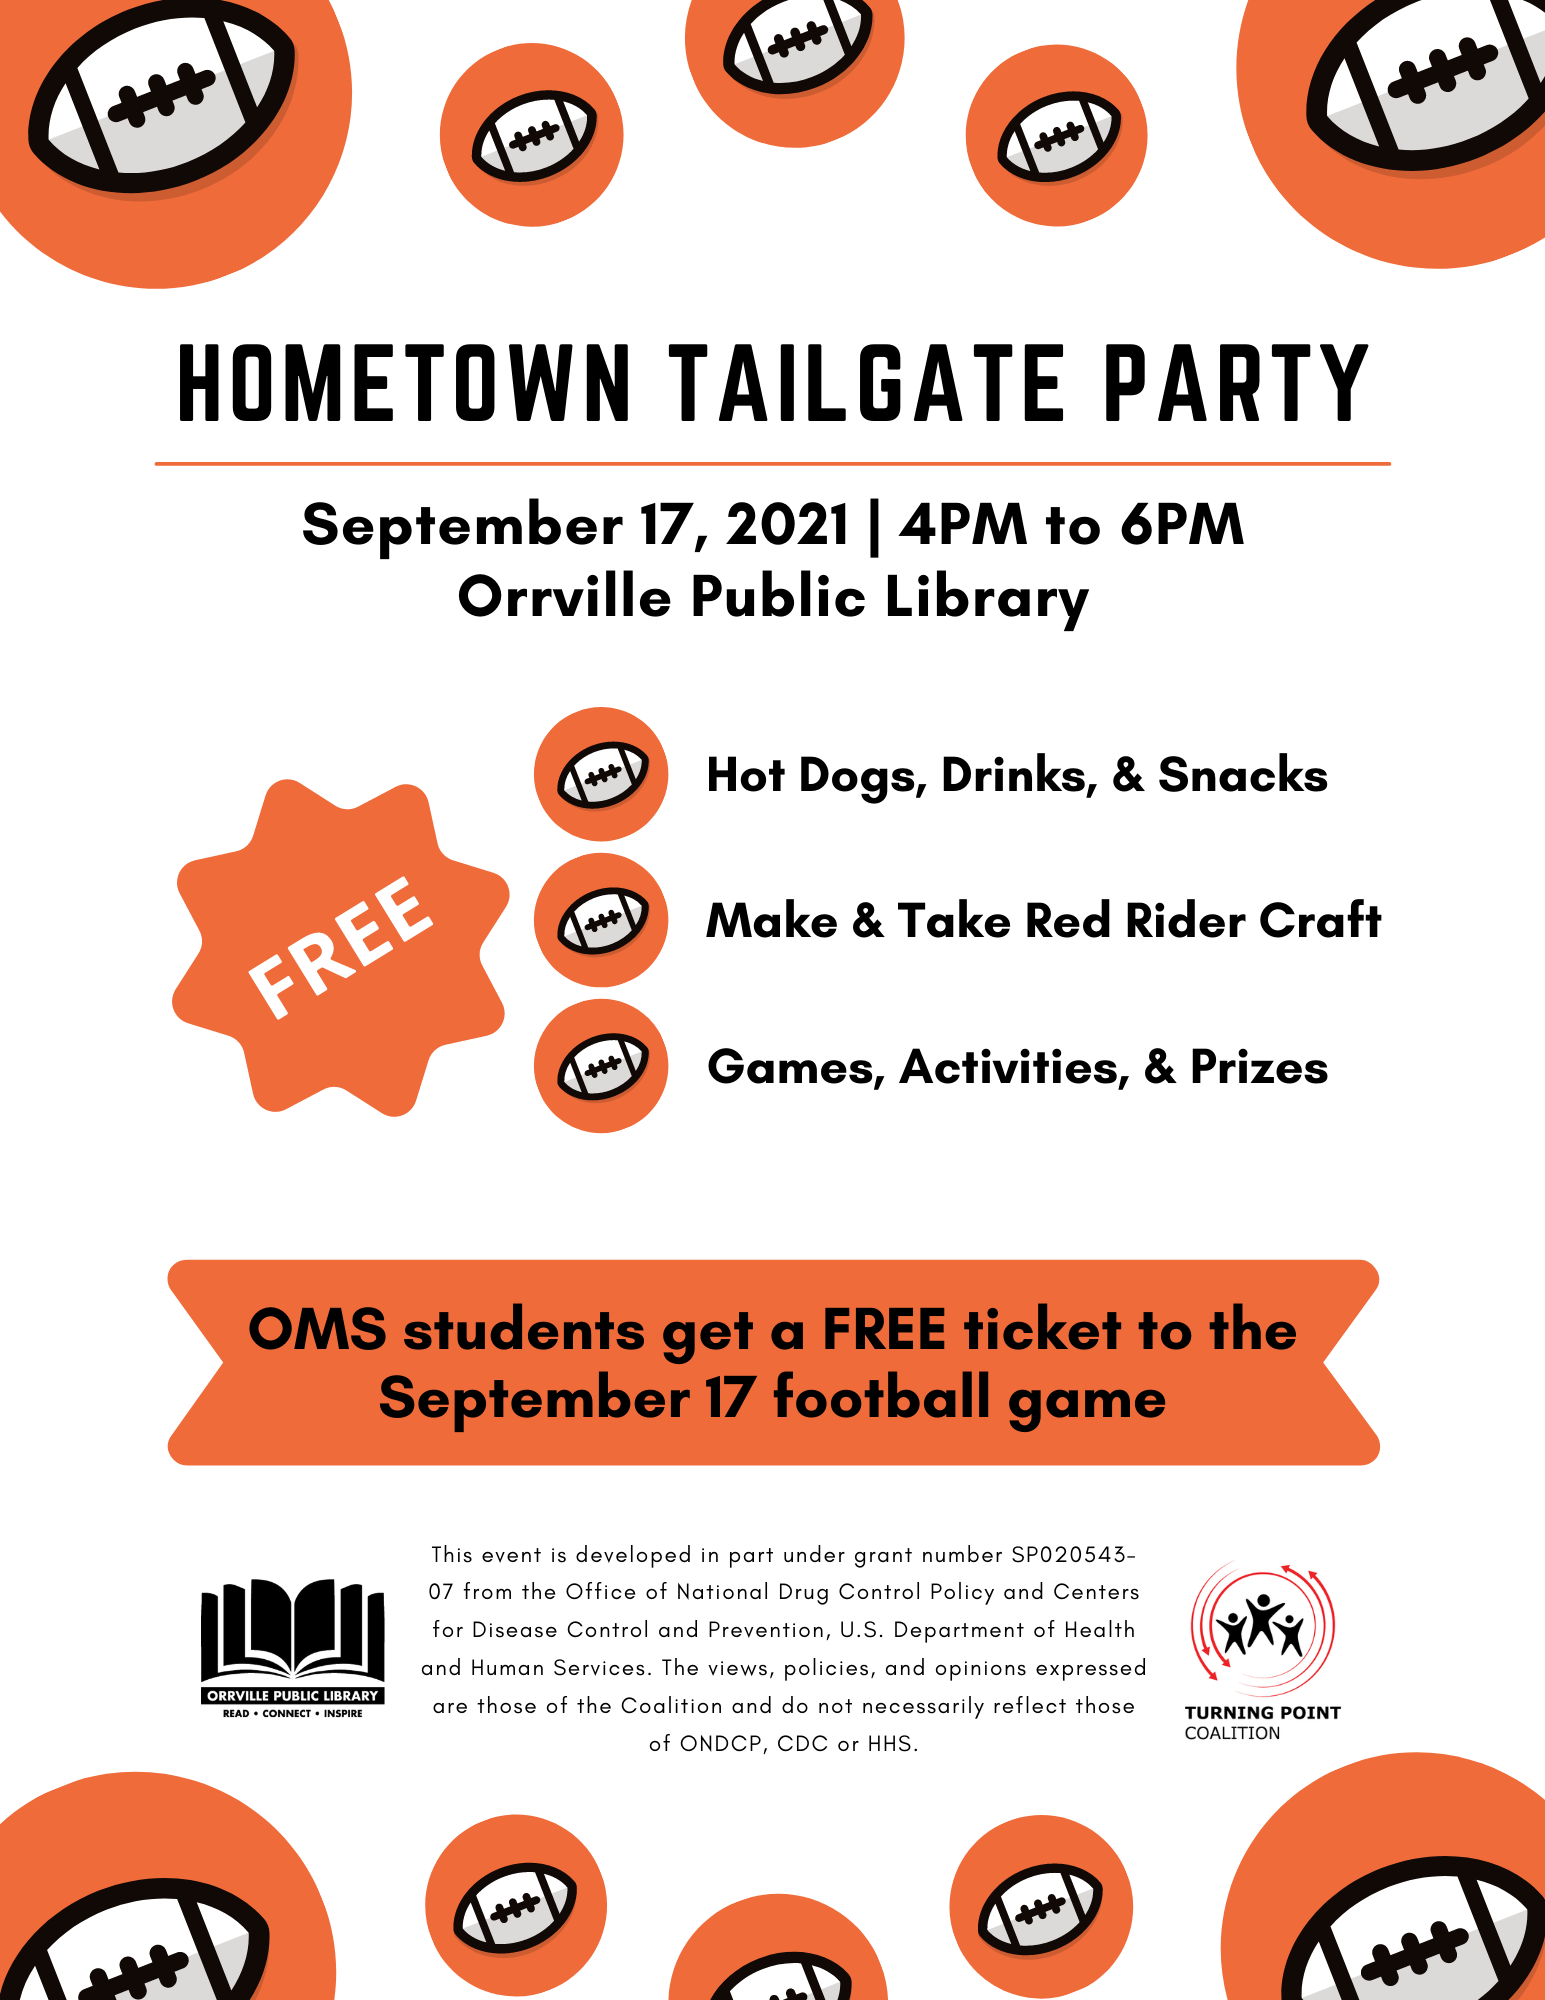 Hometown Tailgate Party Flyer 2021